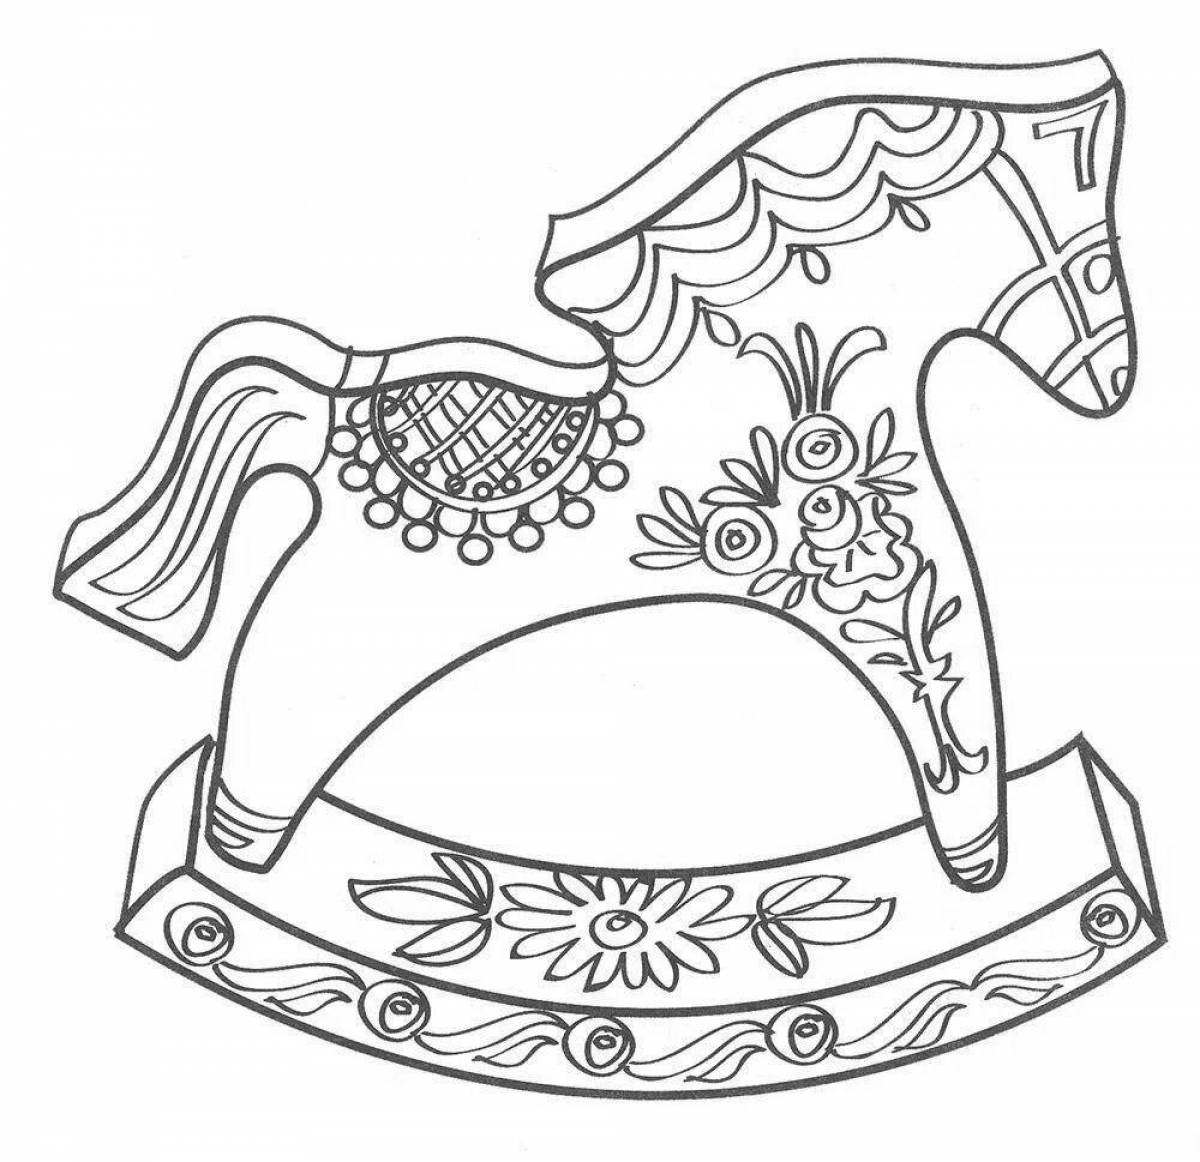 Coloring book funny sample of a Roman toy